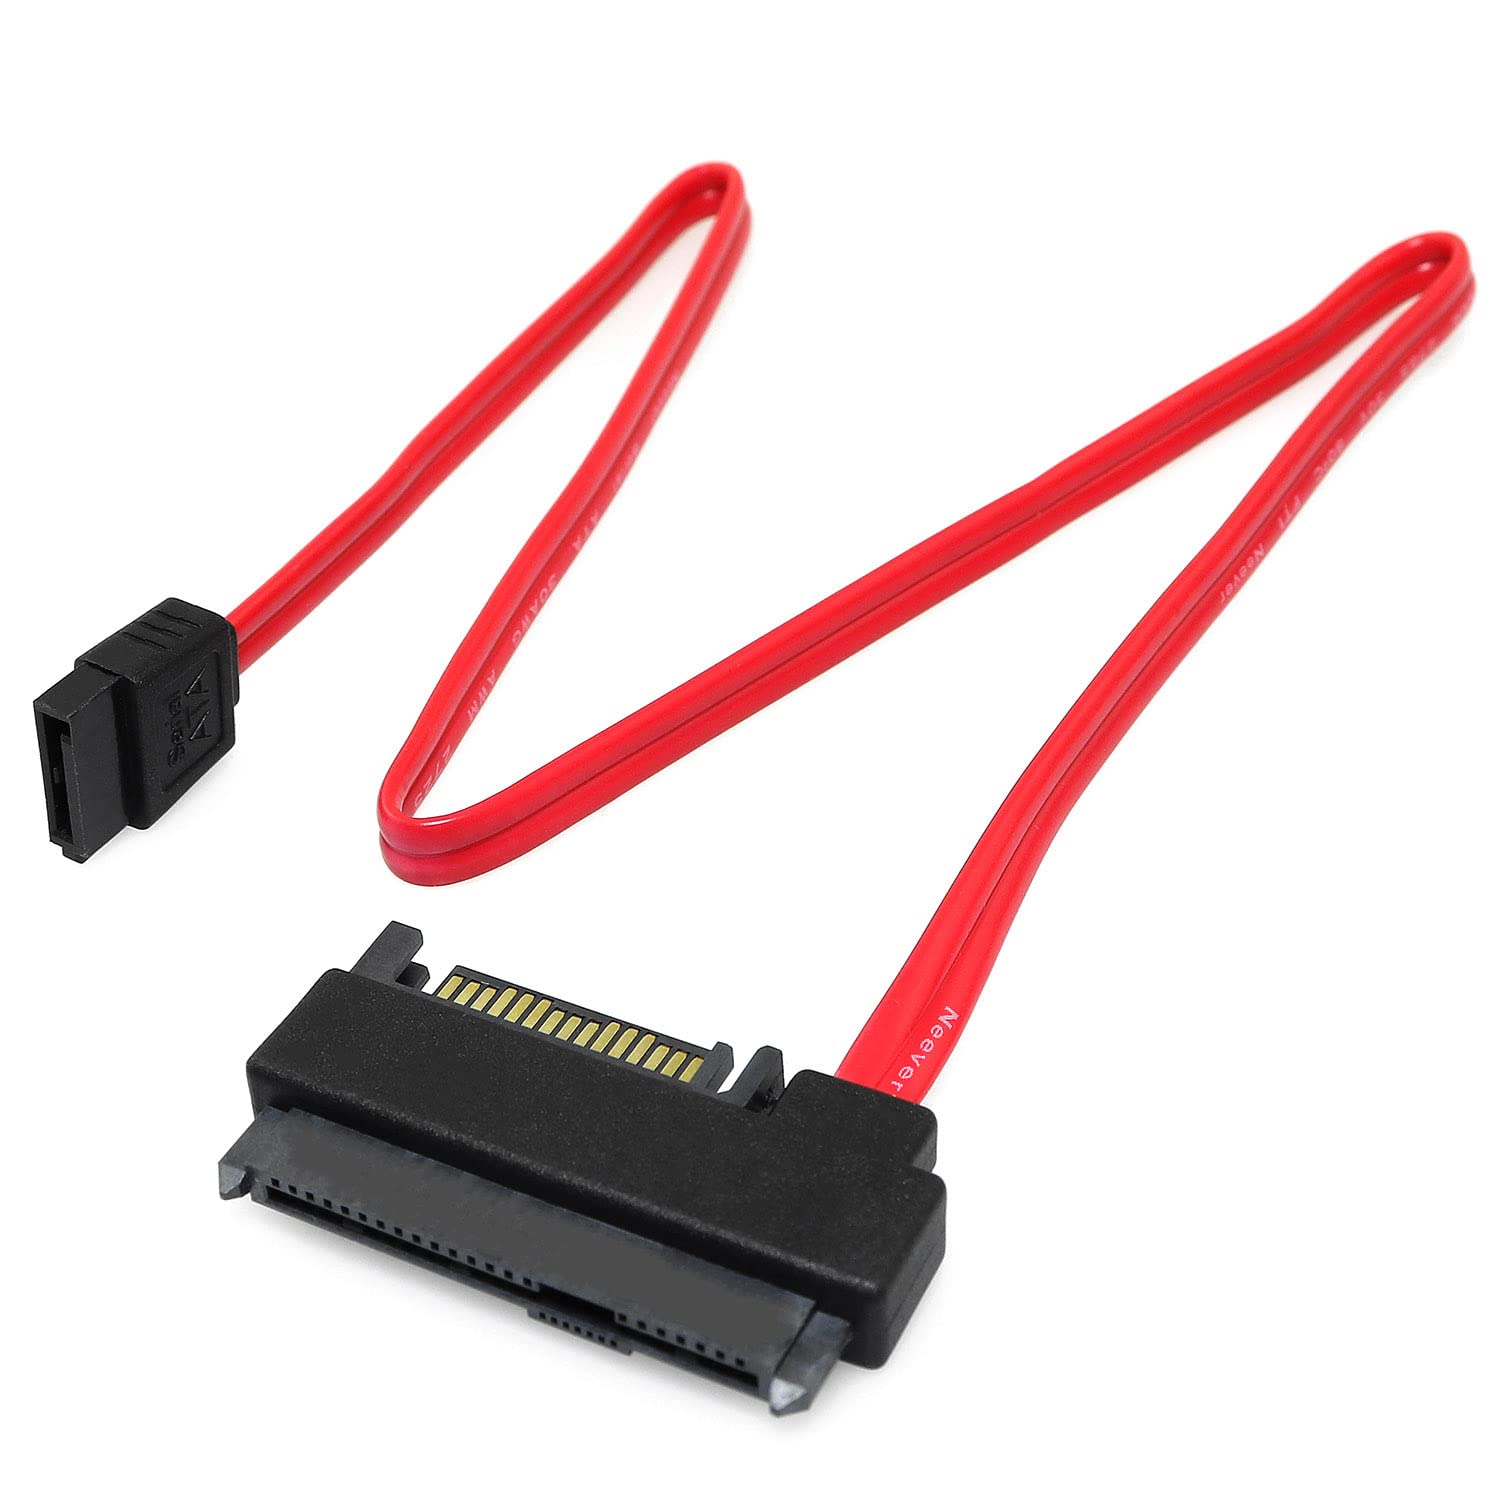 If you have a spare SATA or IDE cable, replace the existing cable with the new one.
Ensure that the new cable is securely connected to the hard drive and motherboard.